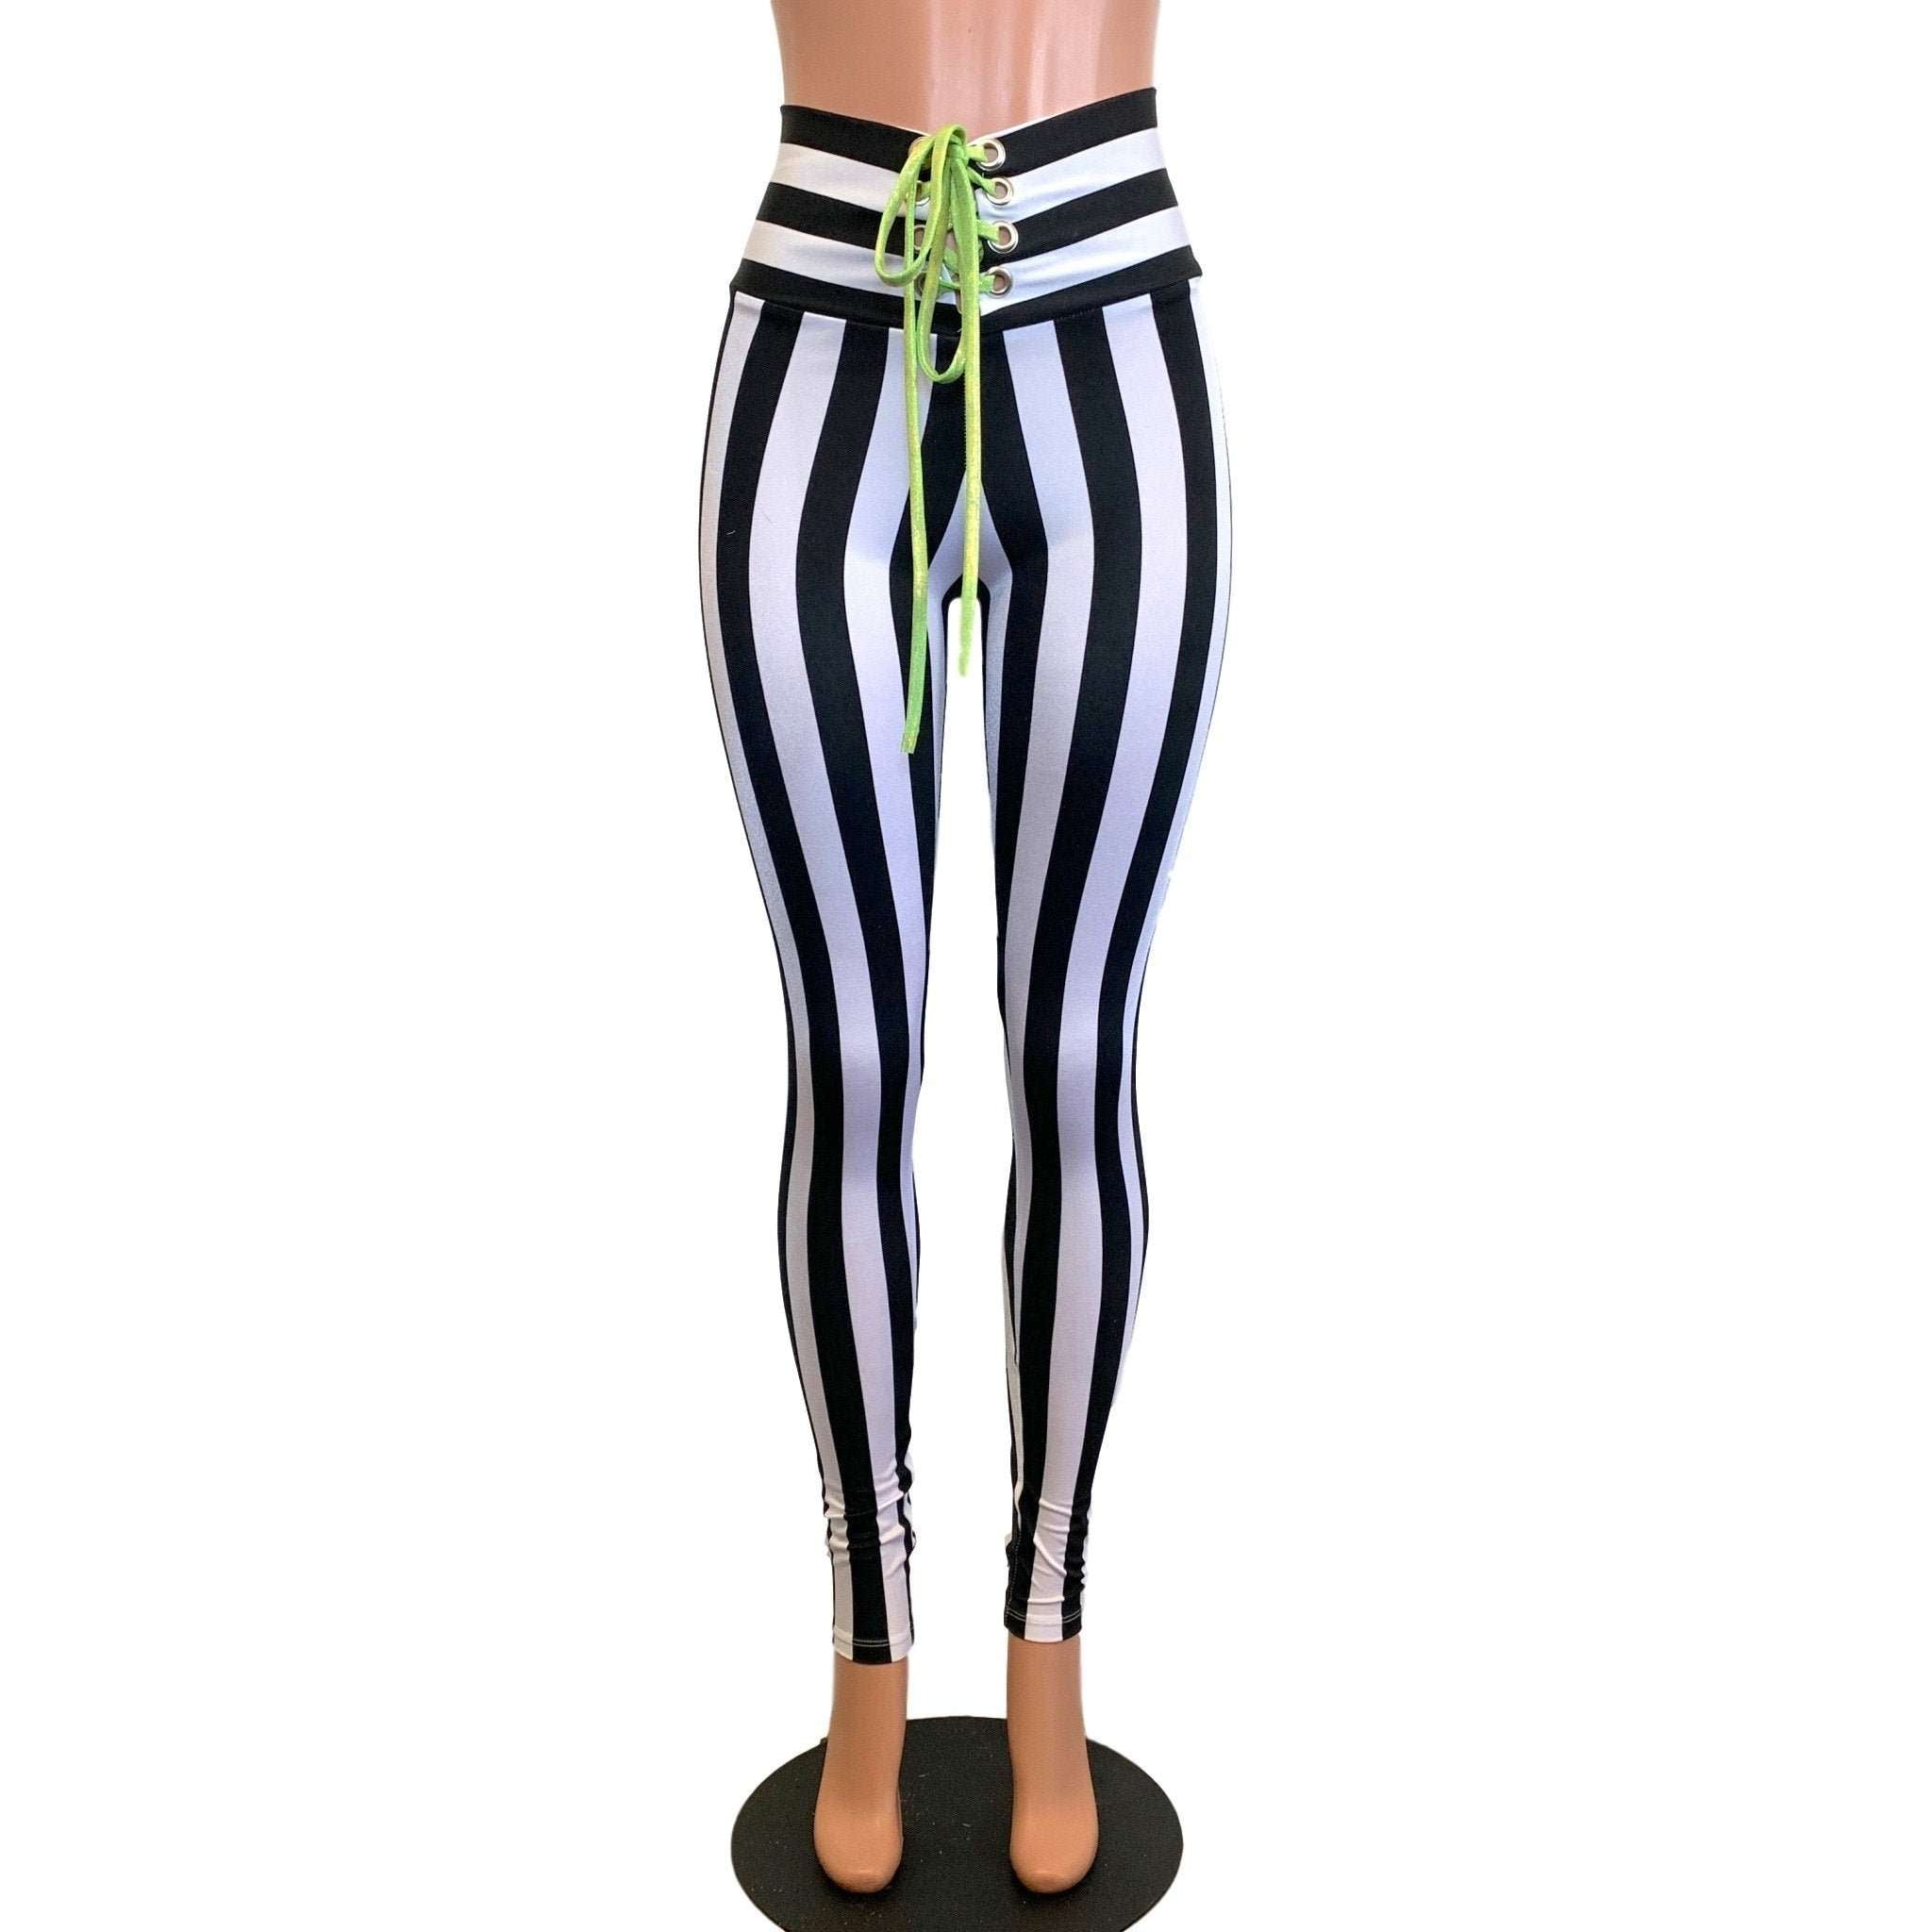 Gym wear Leggings Ankle Length Workout Trousers|Stretchable Striped Leggings  |High Waist Sports Fitness